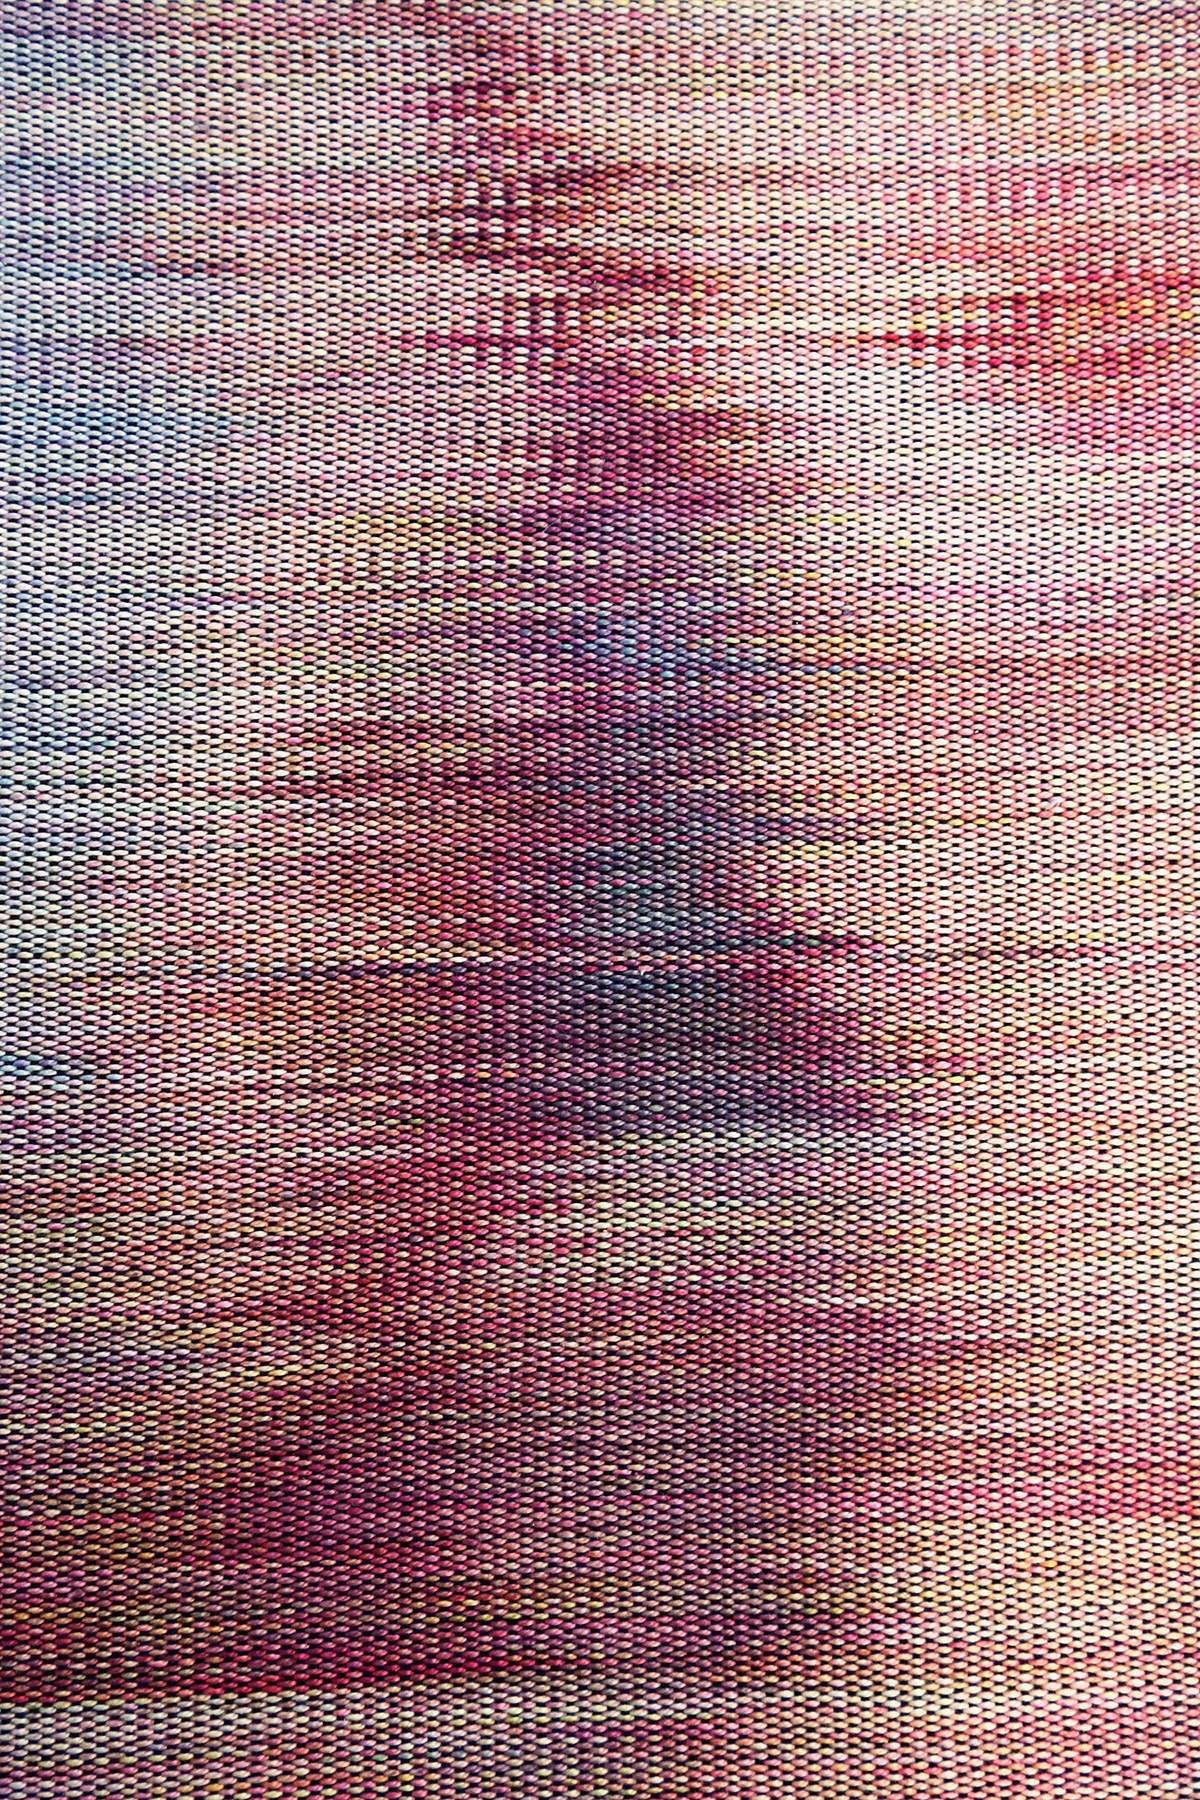 detail of a woven textile with strong horizontal lines shows a hazy image of the crook of an elbow and a bare breast